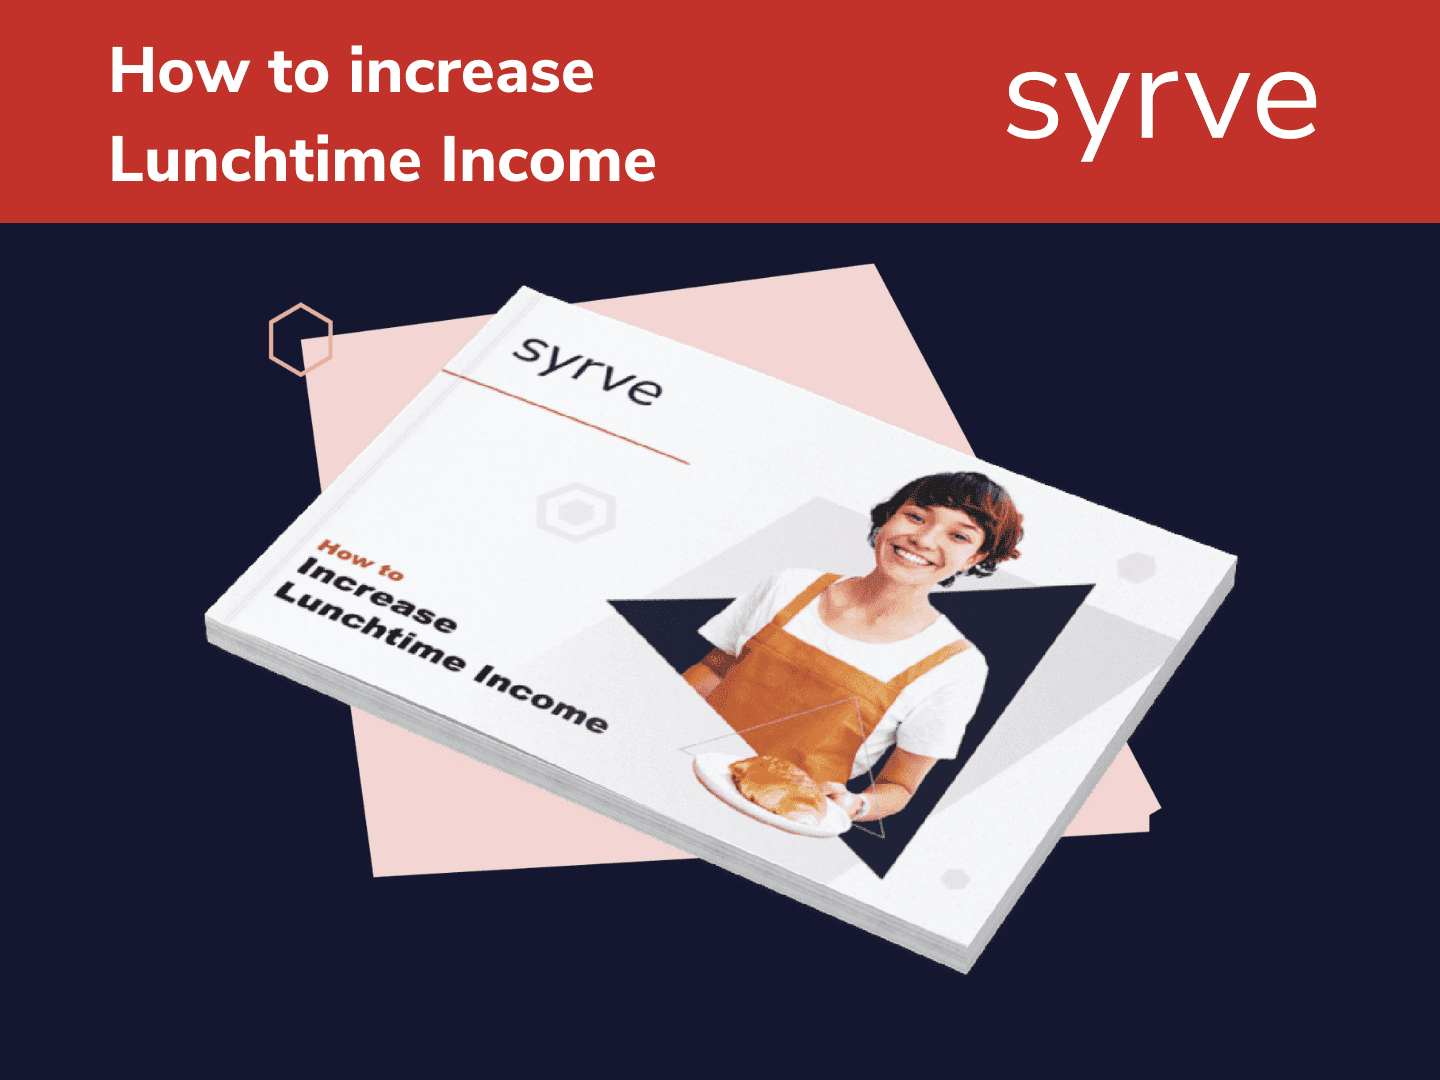 How to increase Lunchtime Income